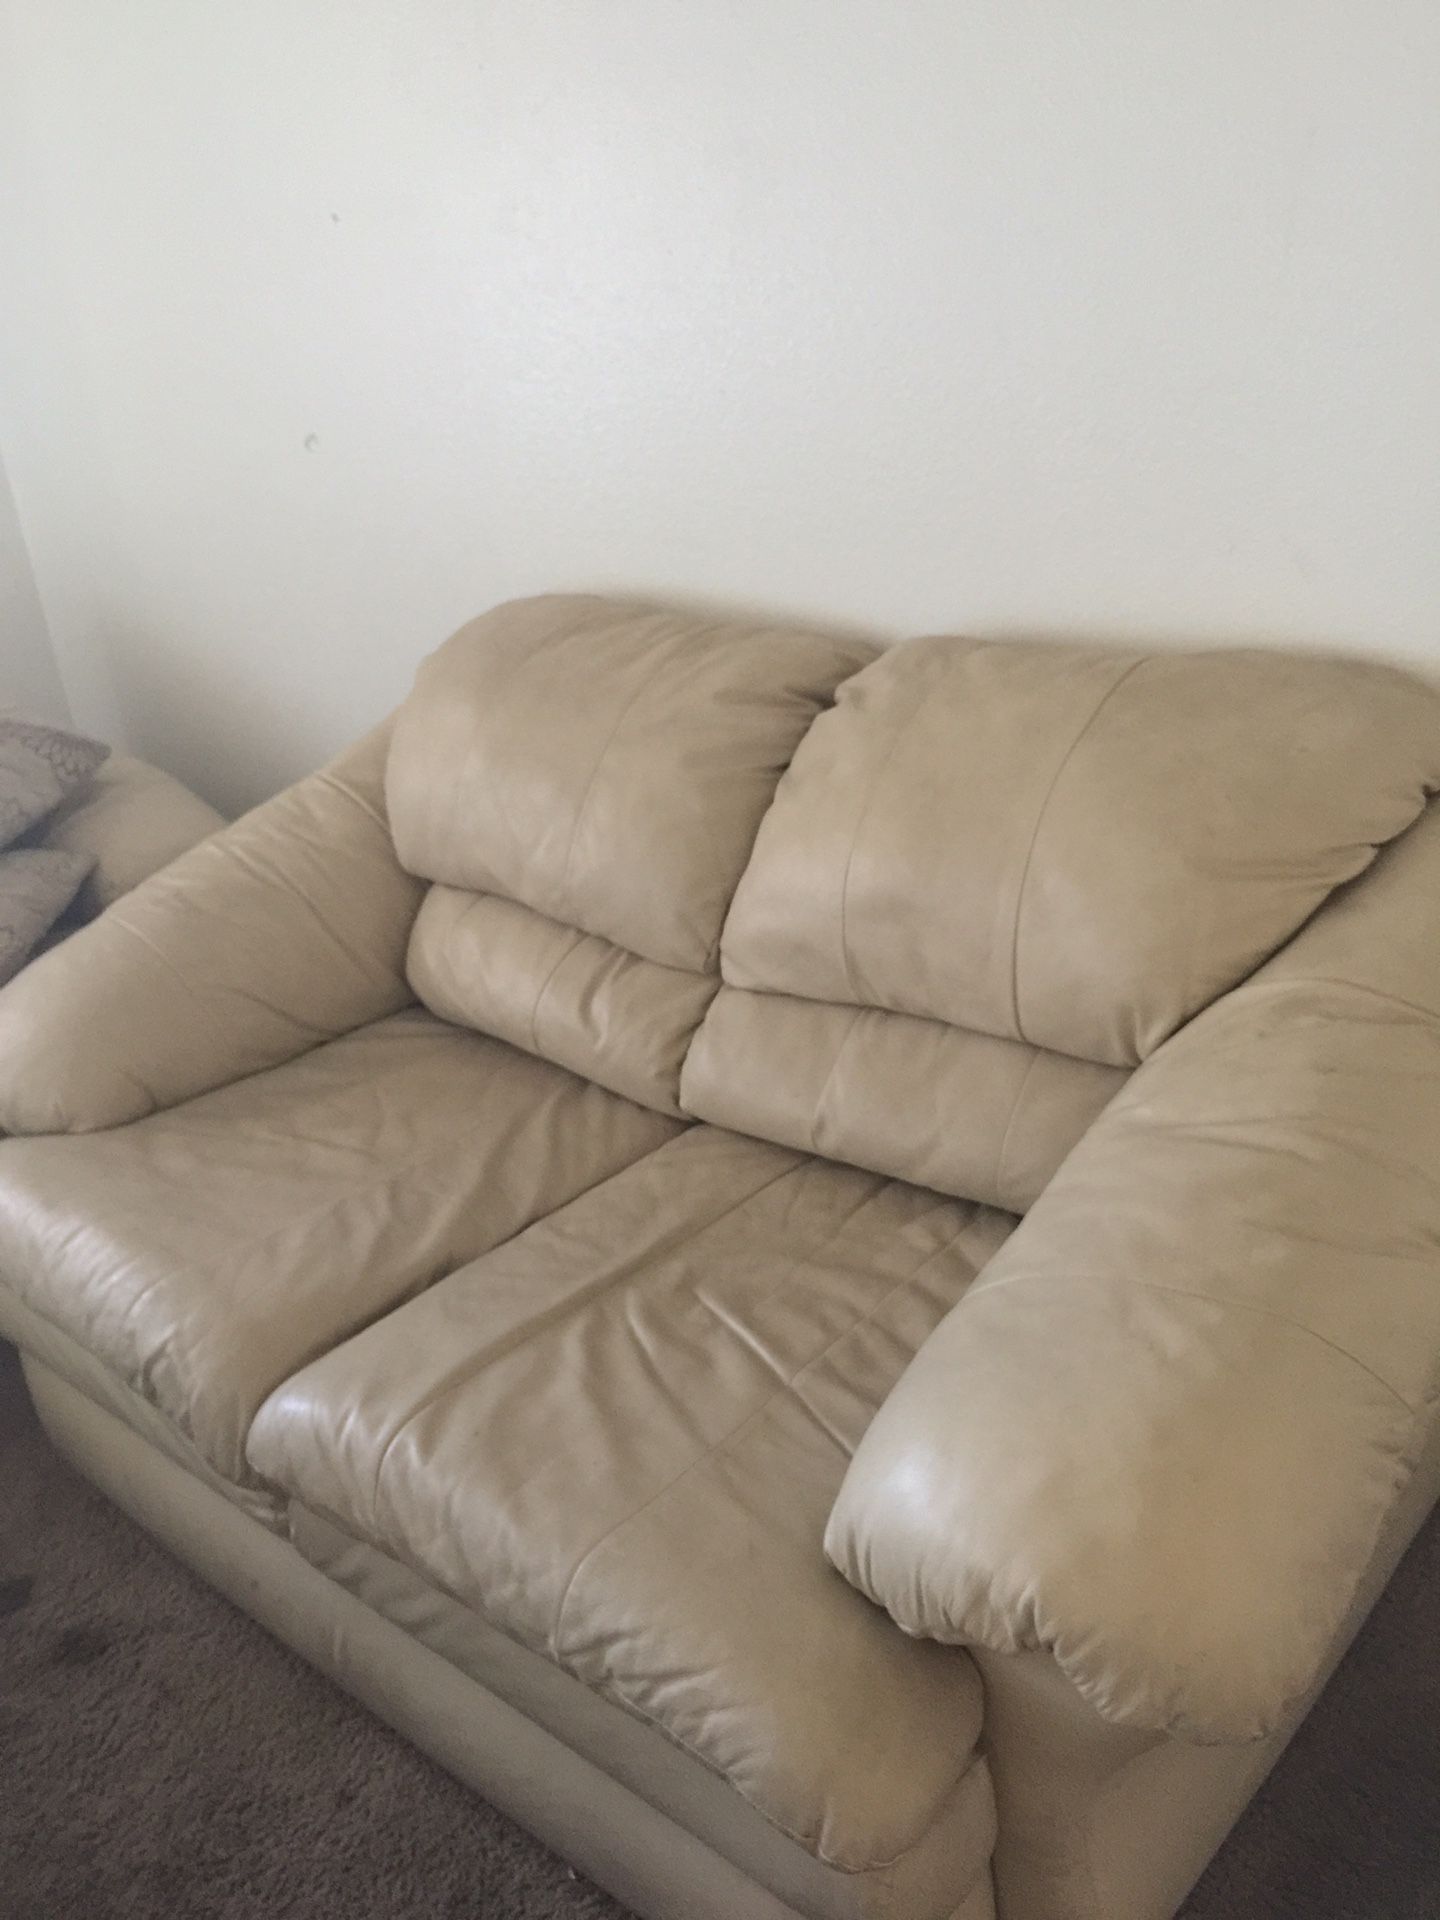 2 couches